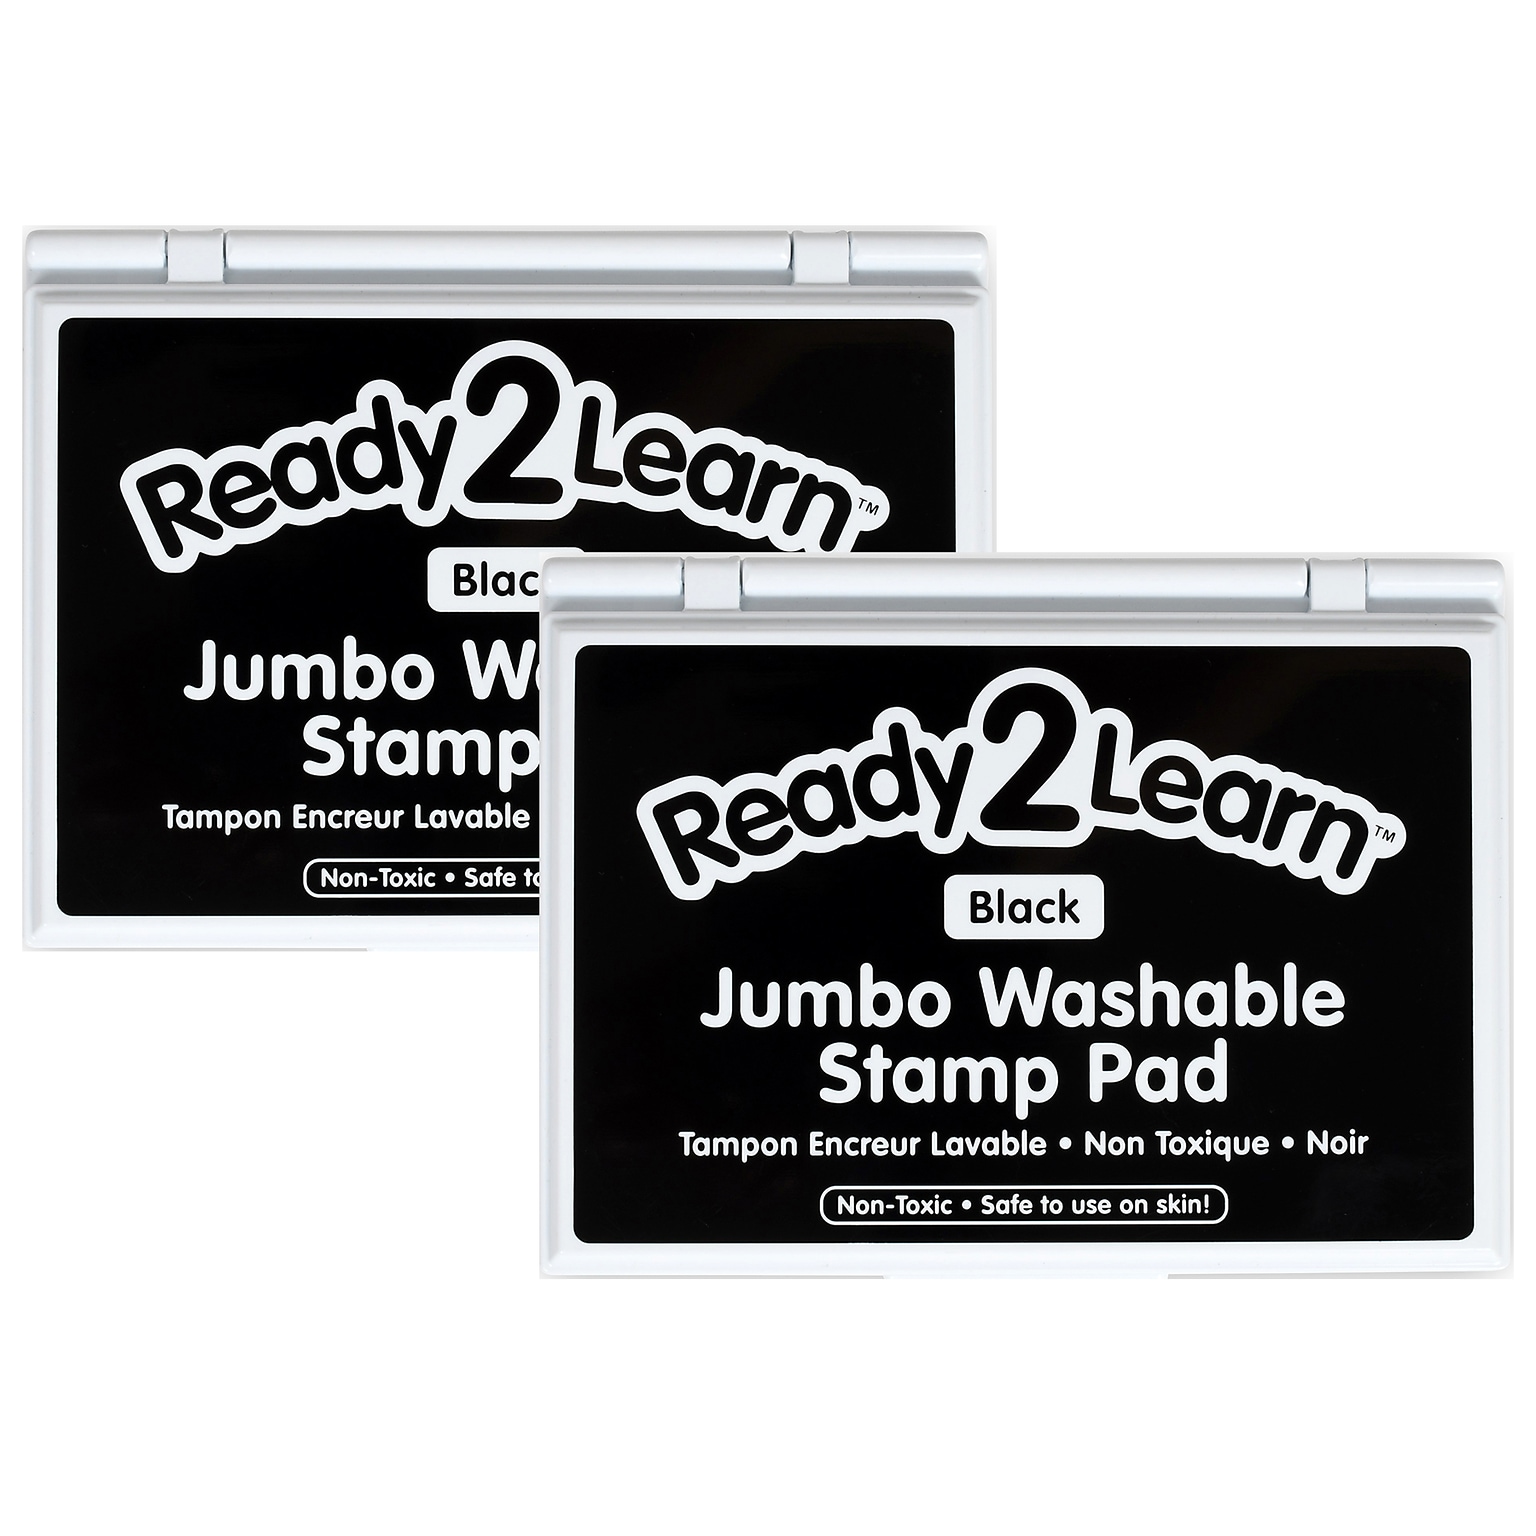 Ready2Learn™ Jumbo Washable Stamp Pad, Black Ink, Pack of 2 (CE-10030-2)